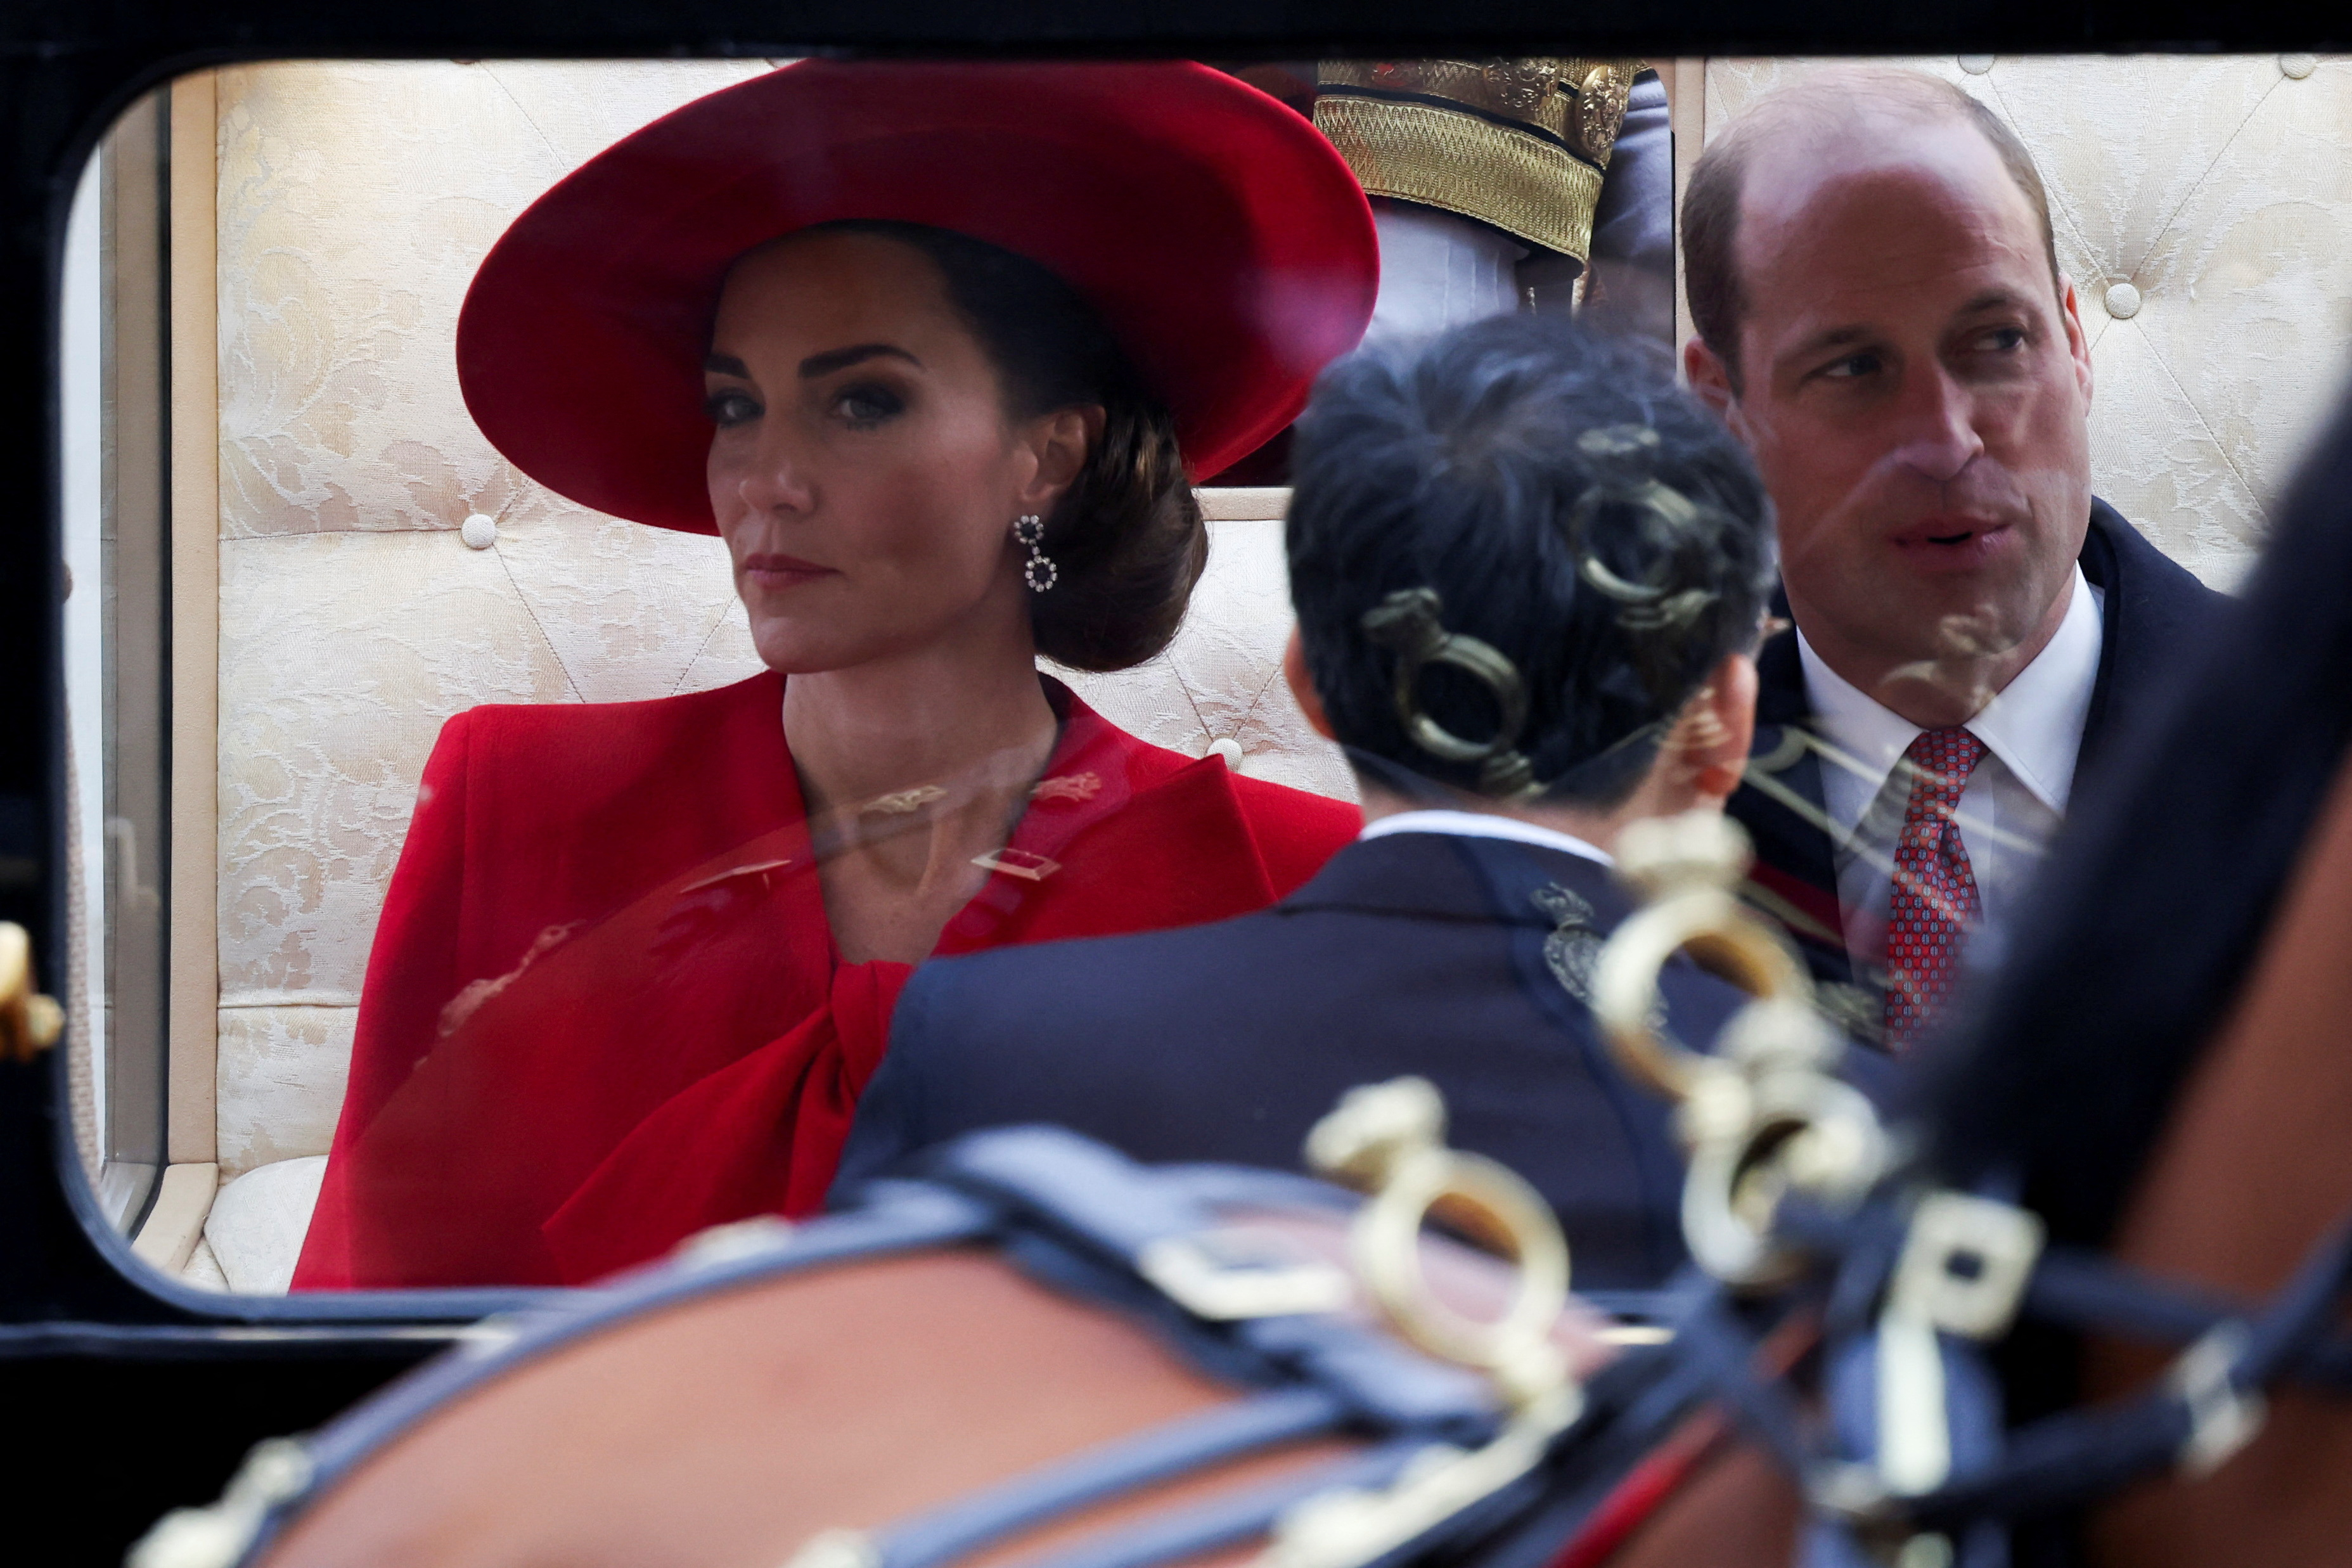 Prince William and Kate Middleton in a carriage, Kate in a large hat and matching outfit, Prince William in a suit and tie